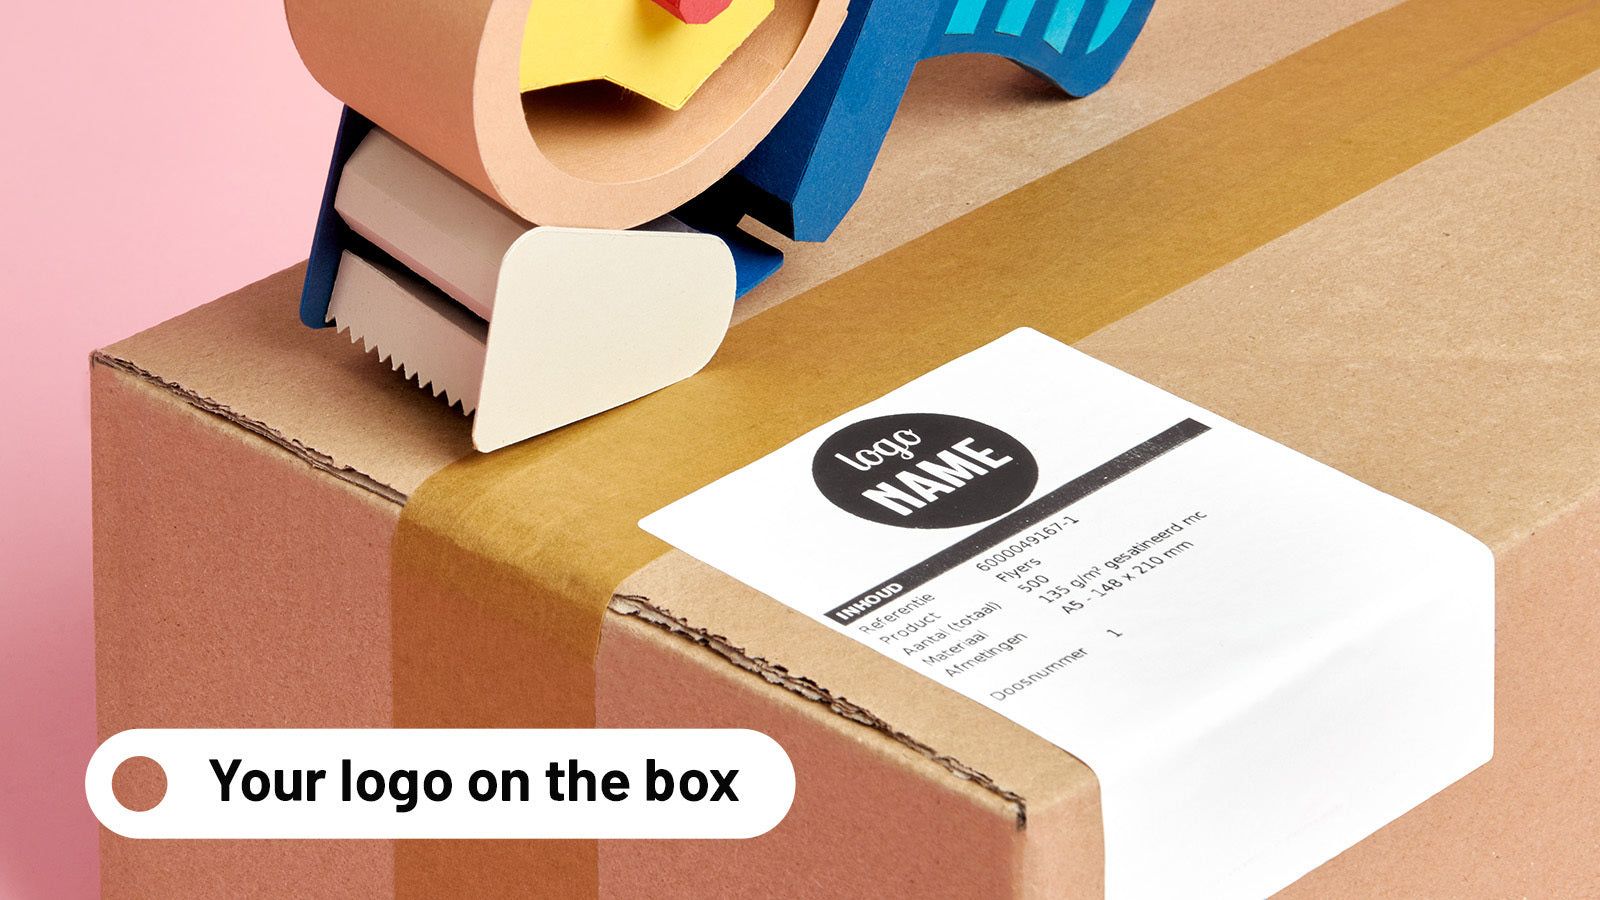 We ship white-label with your logo on the box